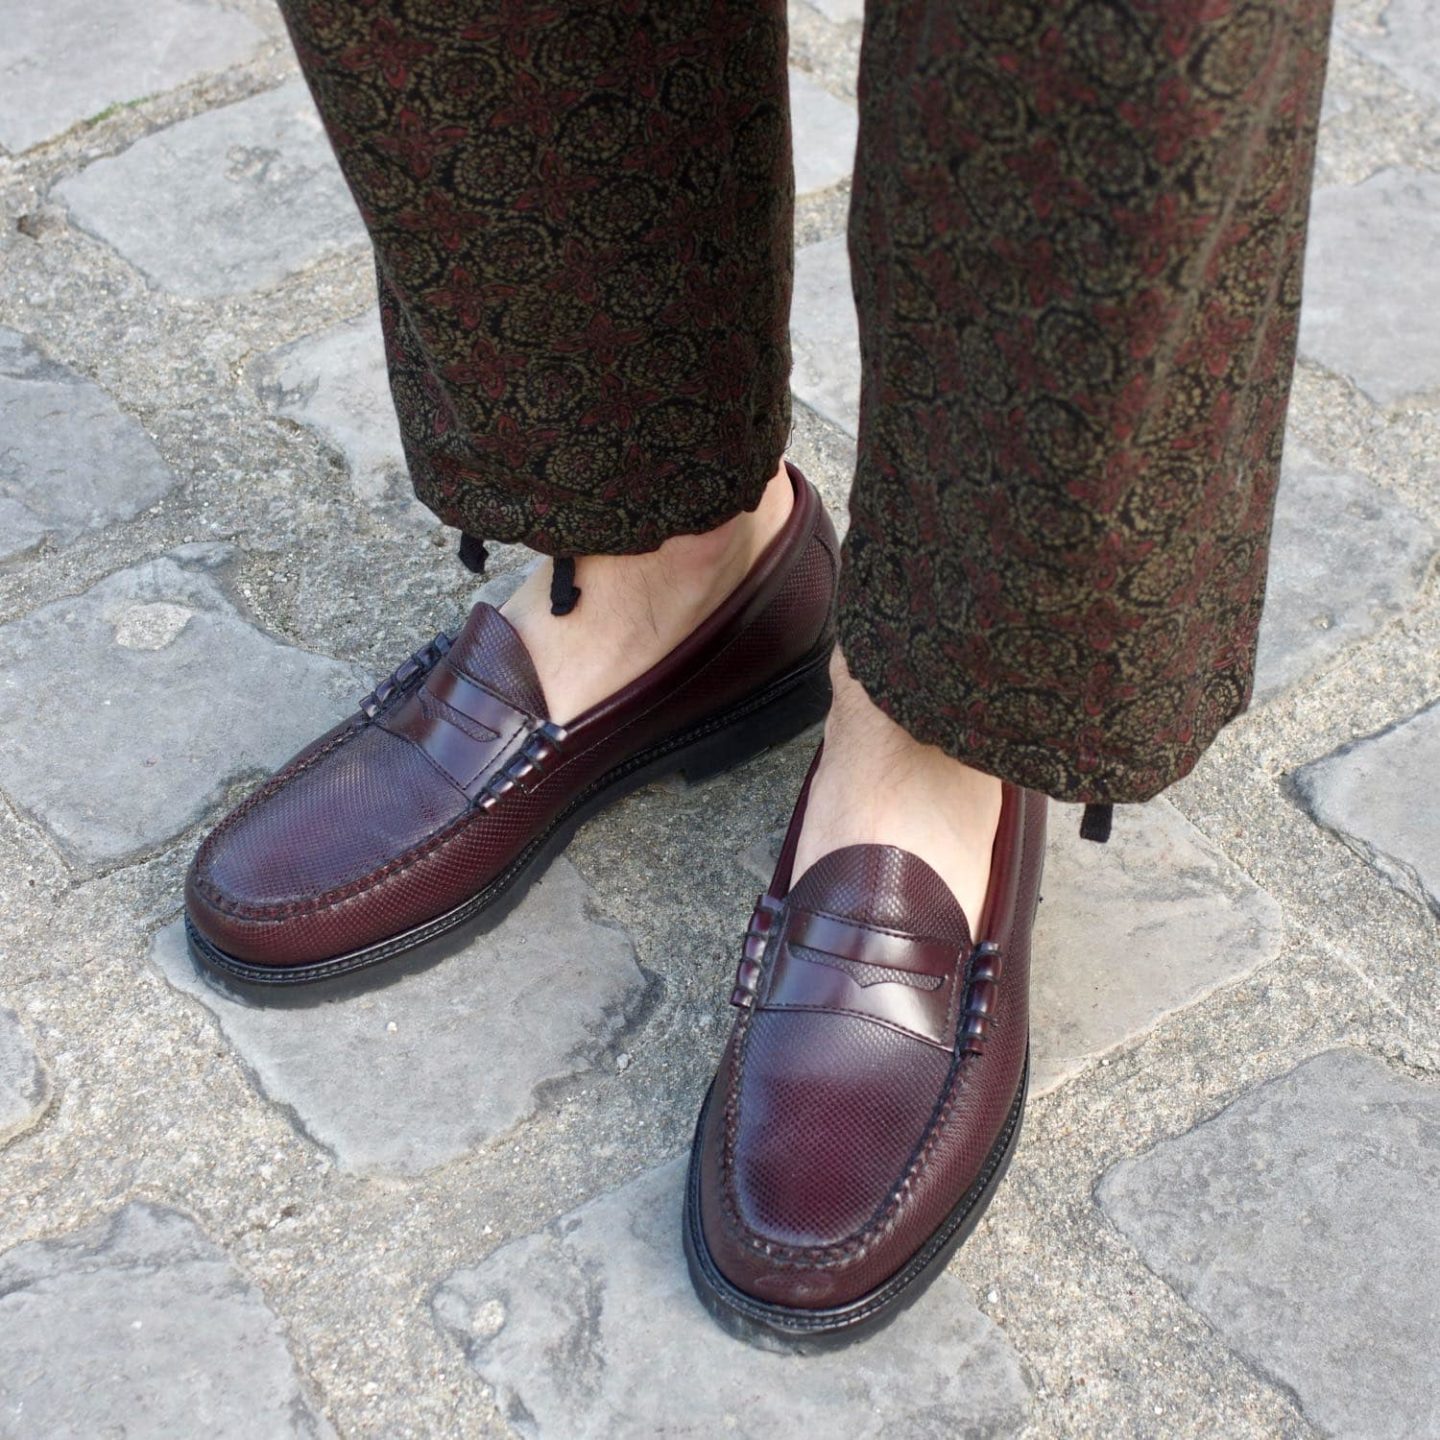 G.H Bass x Fred Perry Penny loafers fake lizard leather